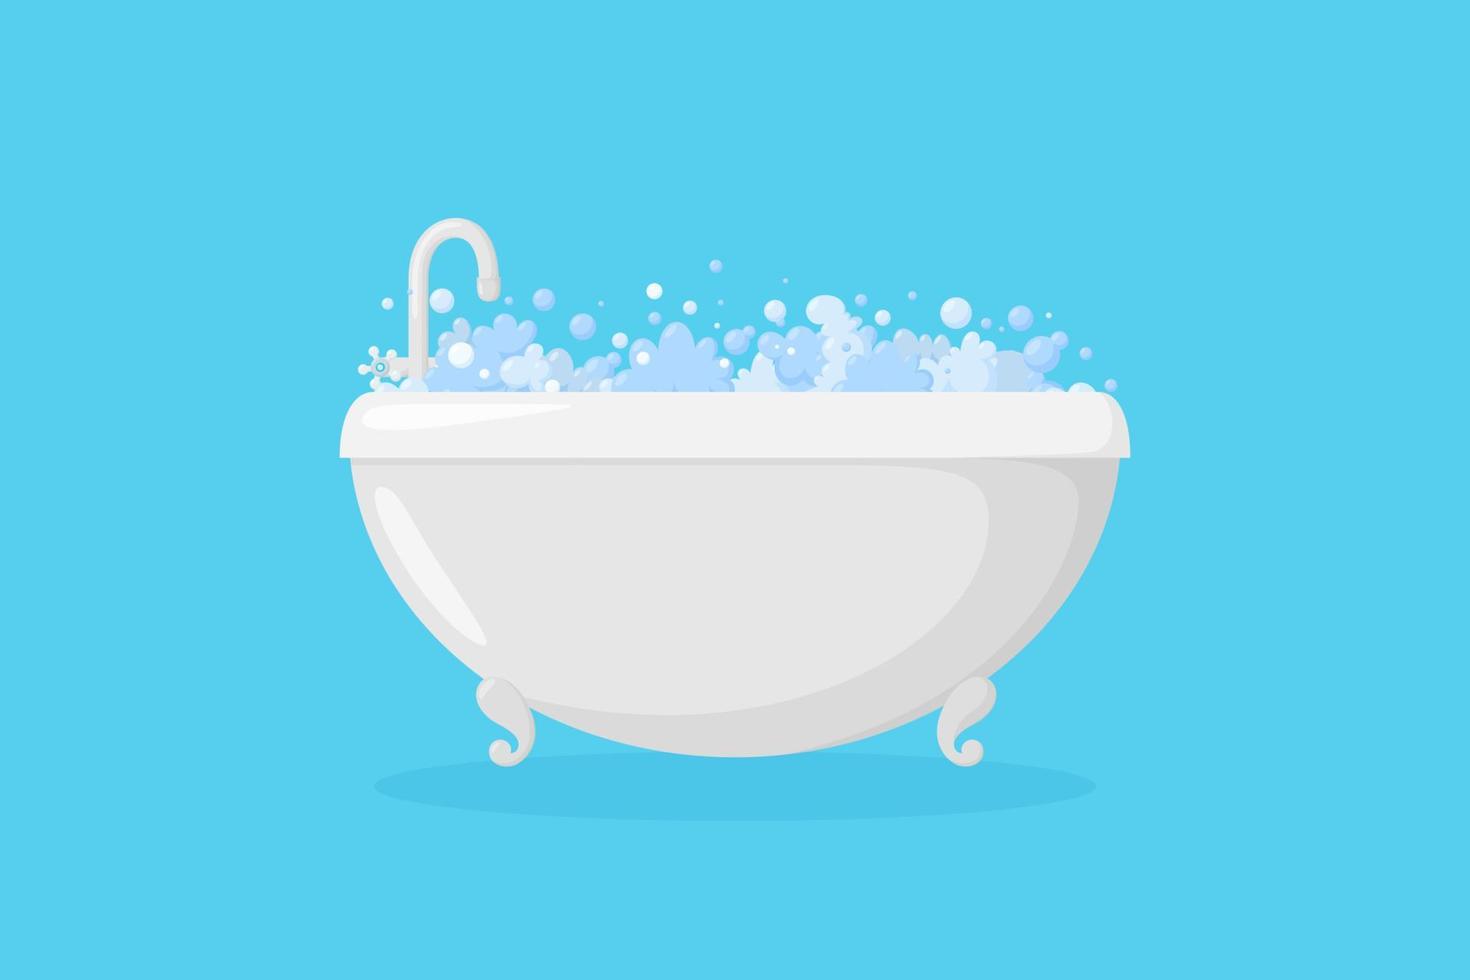 Ellipse bathtub with relax foam and bubbles. Tub with faucet. Vector illustration